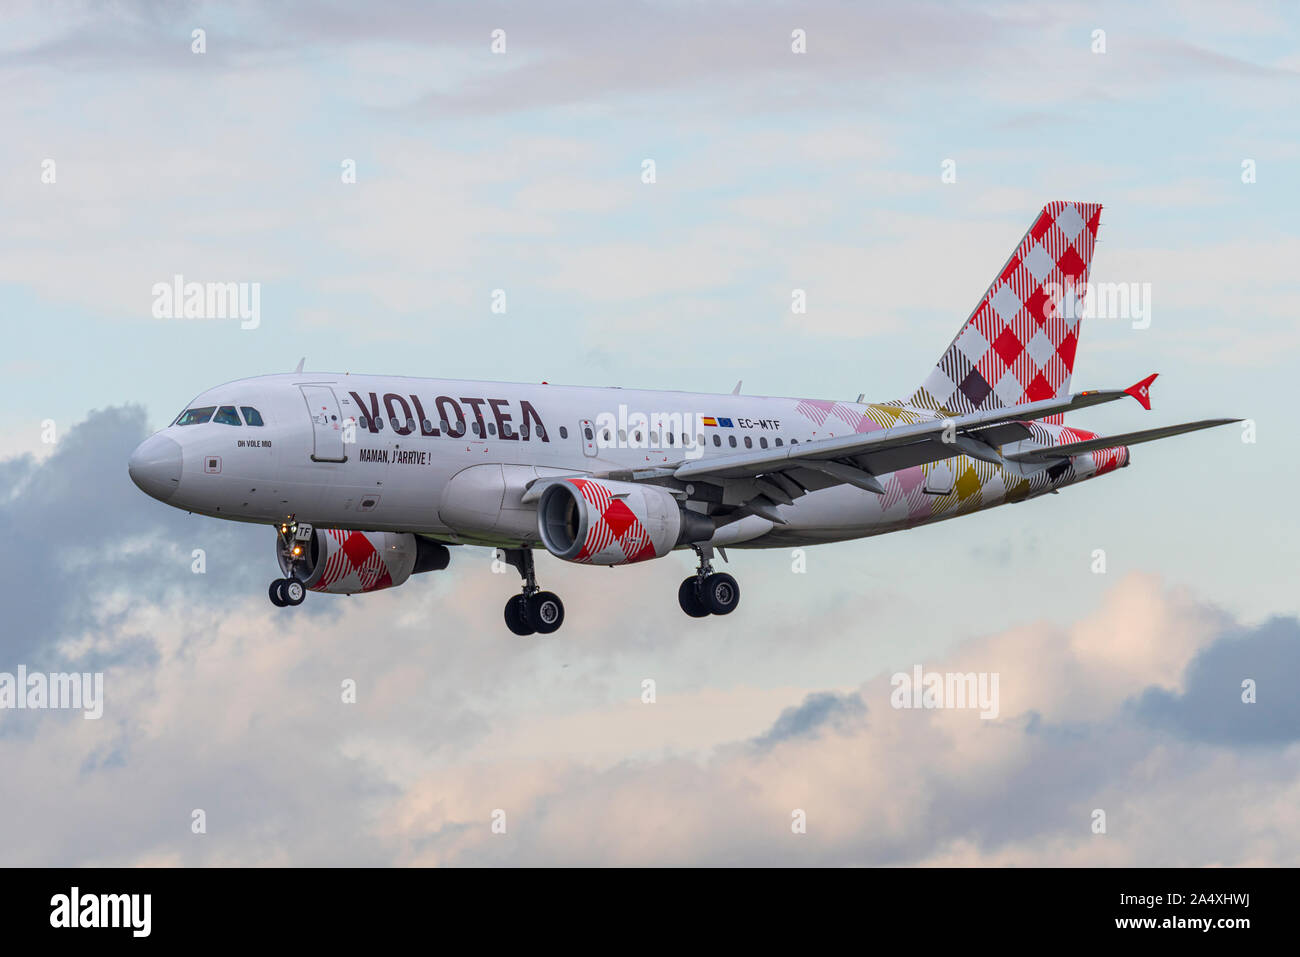 Volotea Airbus A319 jet airliner plane EC-MTF landing at London Southend Airport, Southend on Sea, Essex, UK. Spanish budget airline Stock Photo